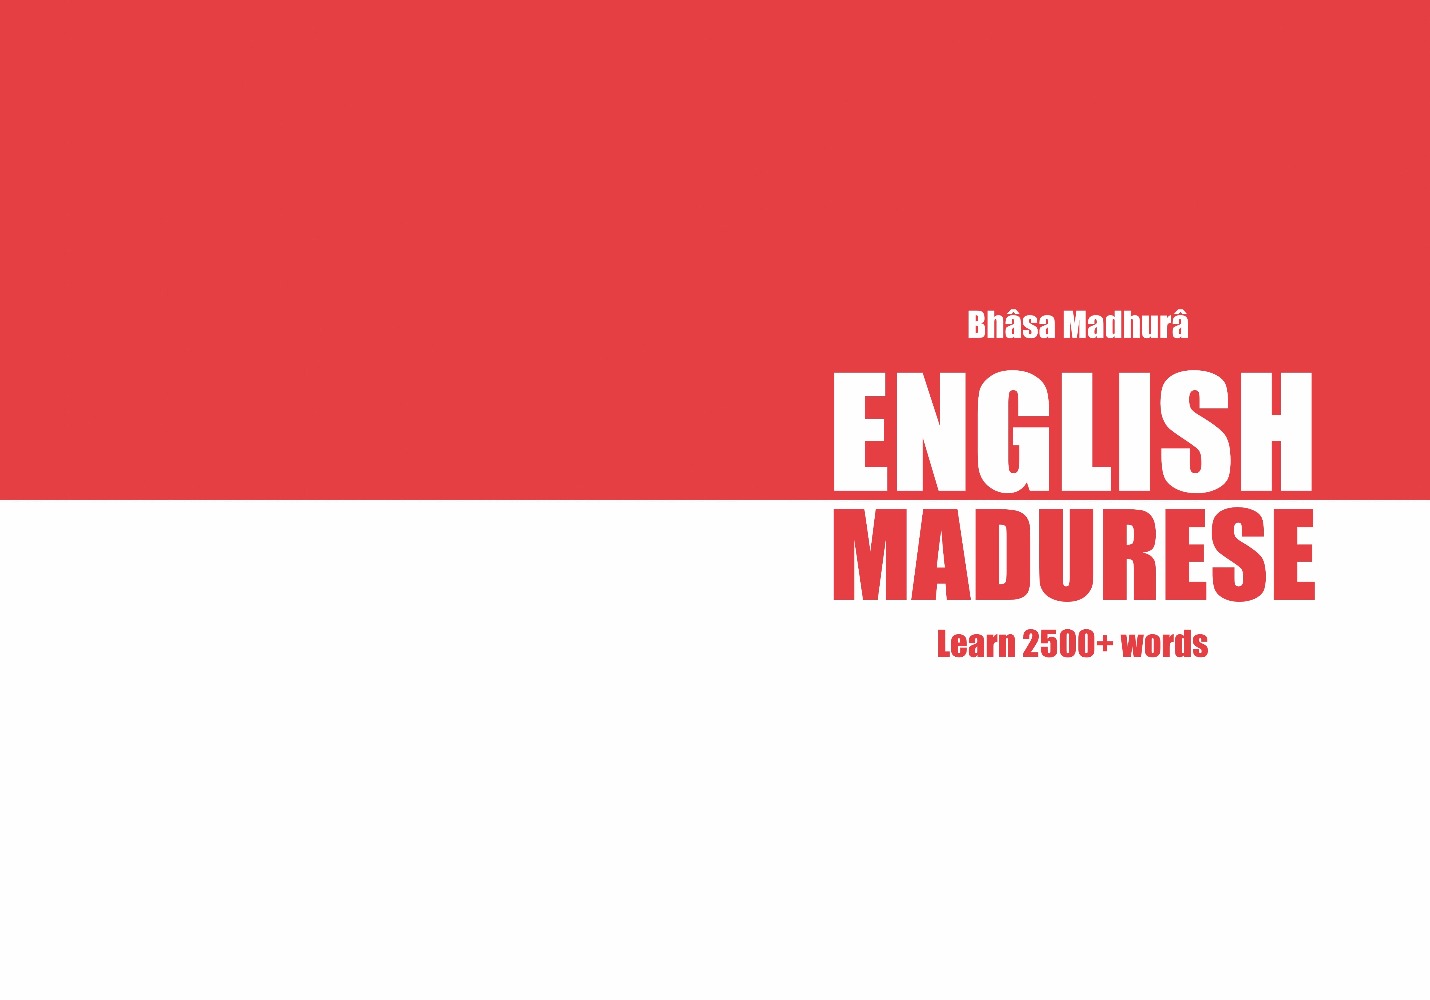 Madurese language learning notebook cover